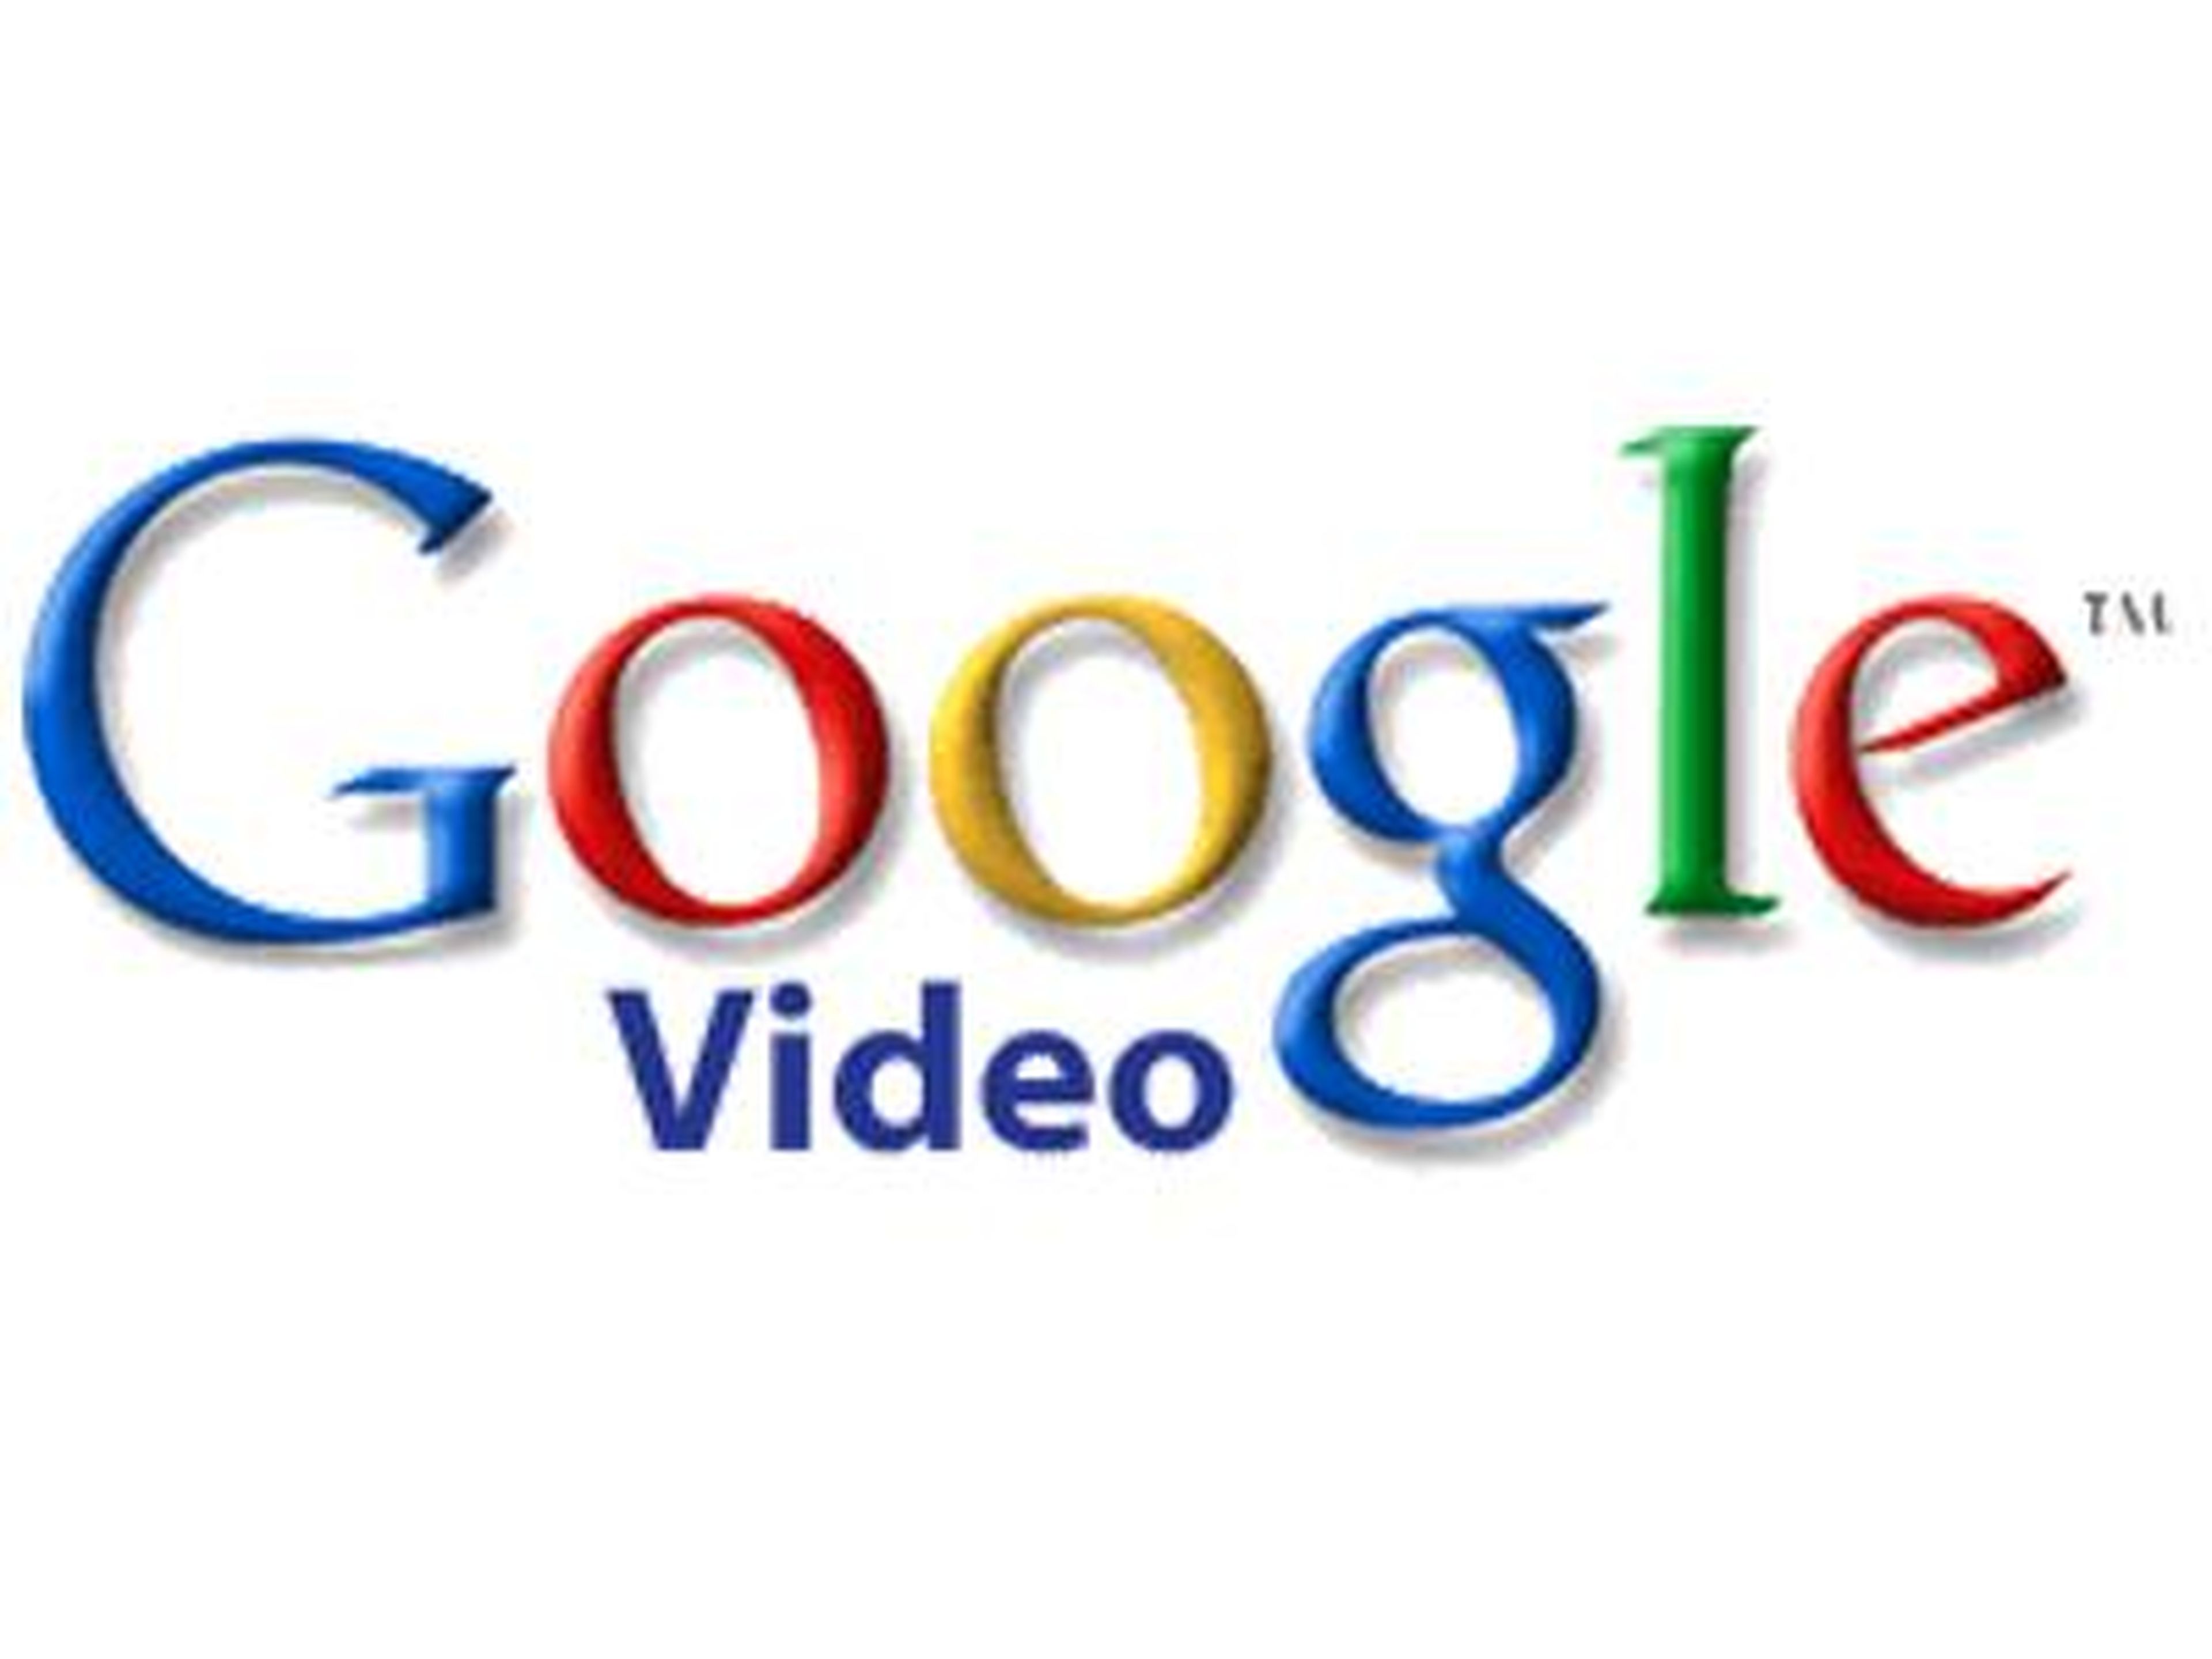 Google Video was Google's own video-streaming service, launched before the company bought YouTube in 2006. Google Video stopped accepting new uploads in 2009, but Video and Youtube coexisted until August 2012 when Google shut down